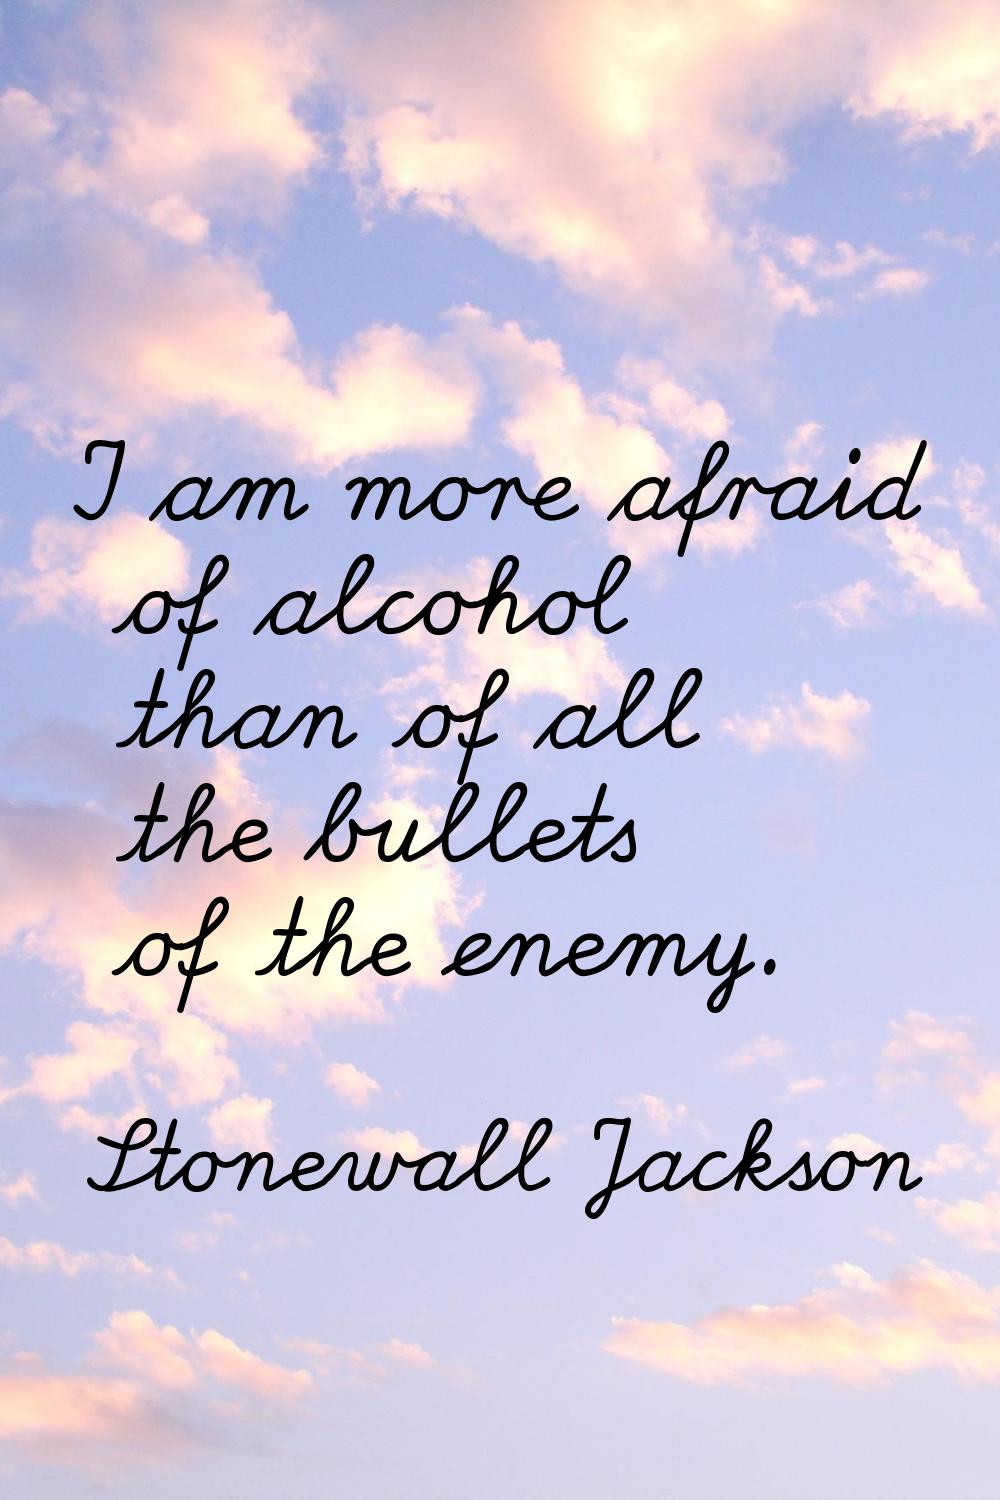 I am more afraid of alcohol than of all the bullets of the enemy.